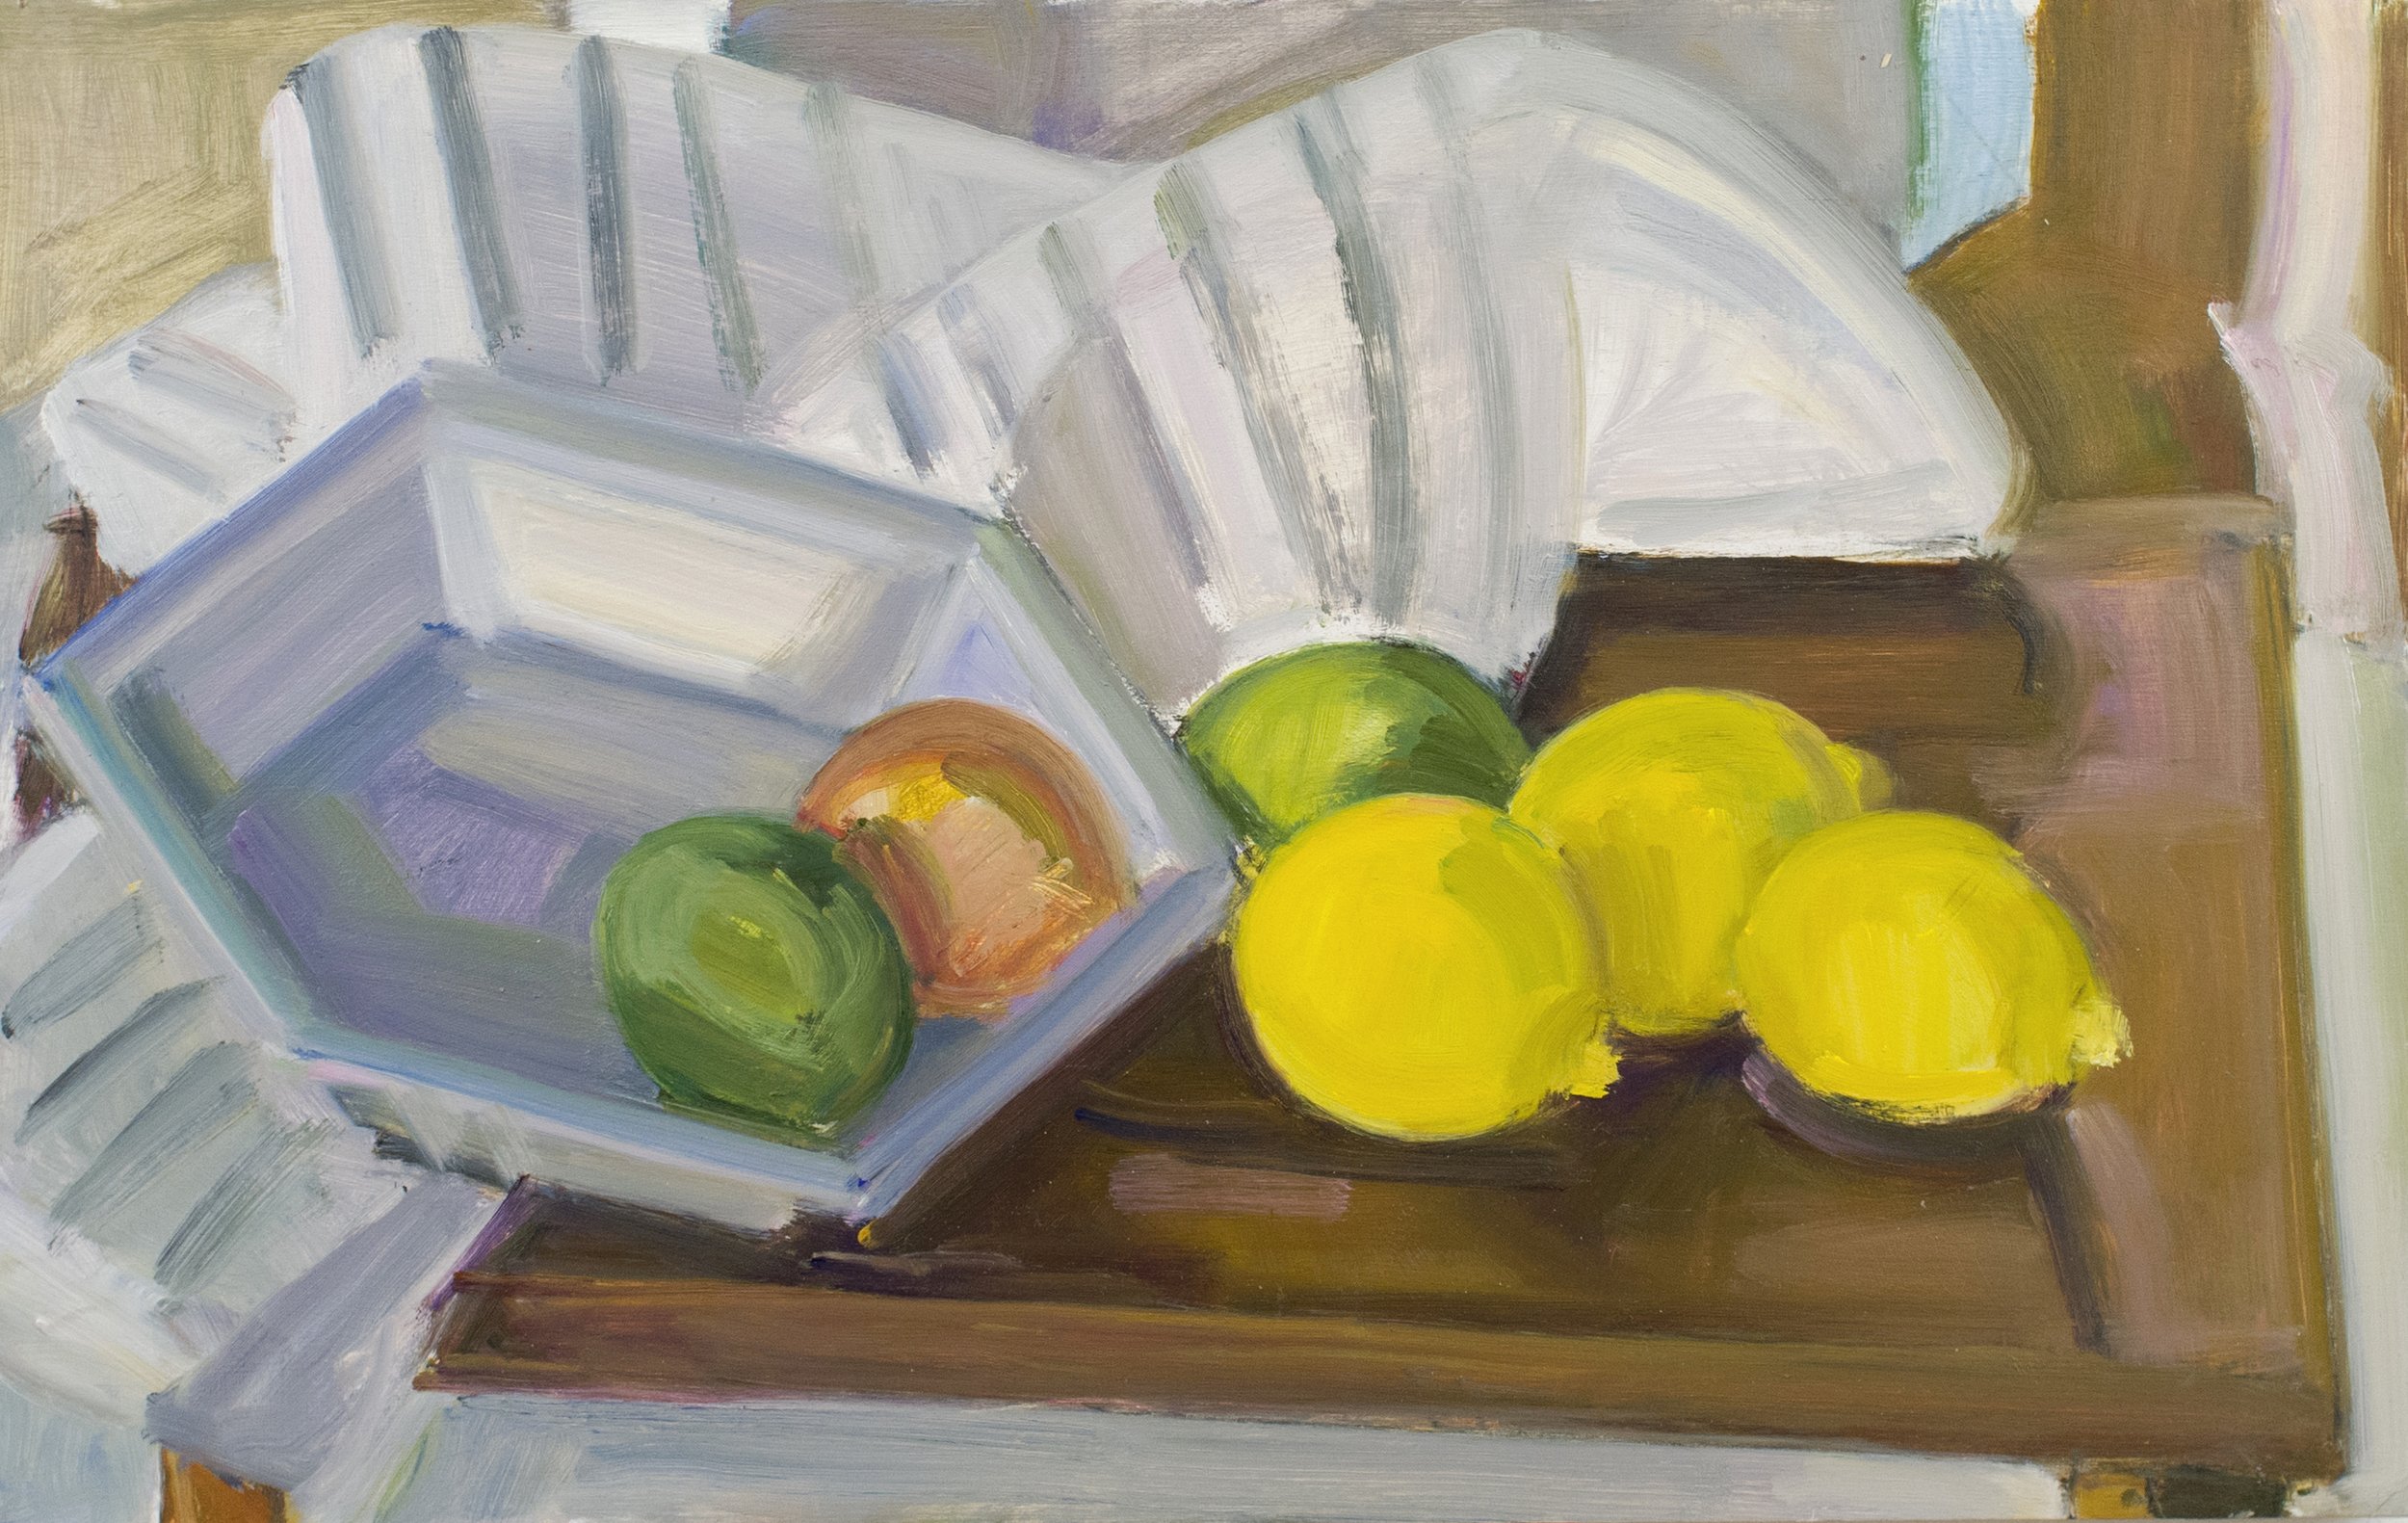   Hexagonal Pie Tin, Lemons and Limes in Doorway , c. 2015, oil/panel, 10 x 16 in. (Private collection) 